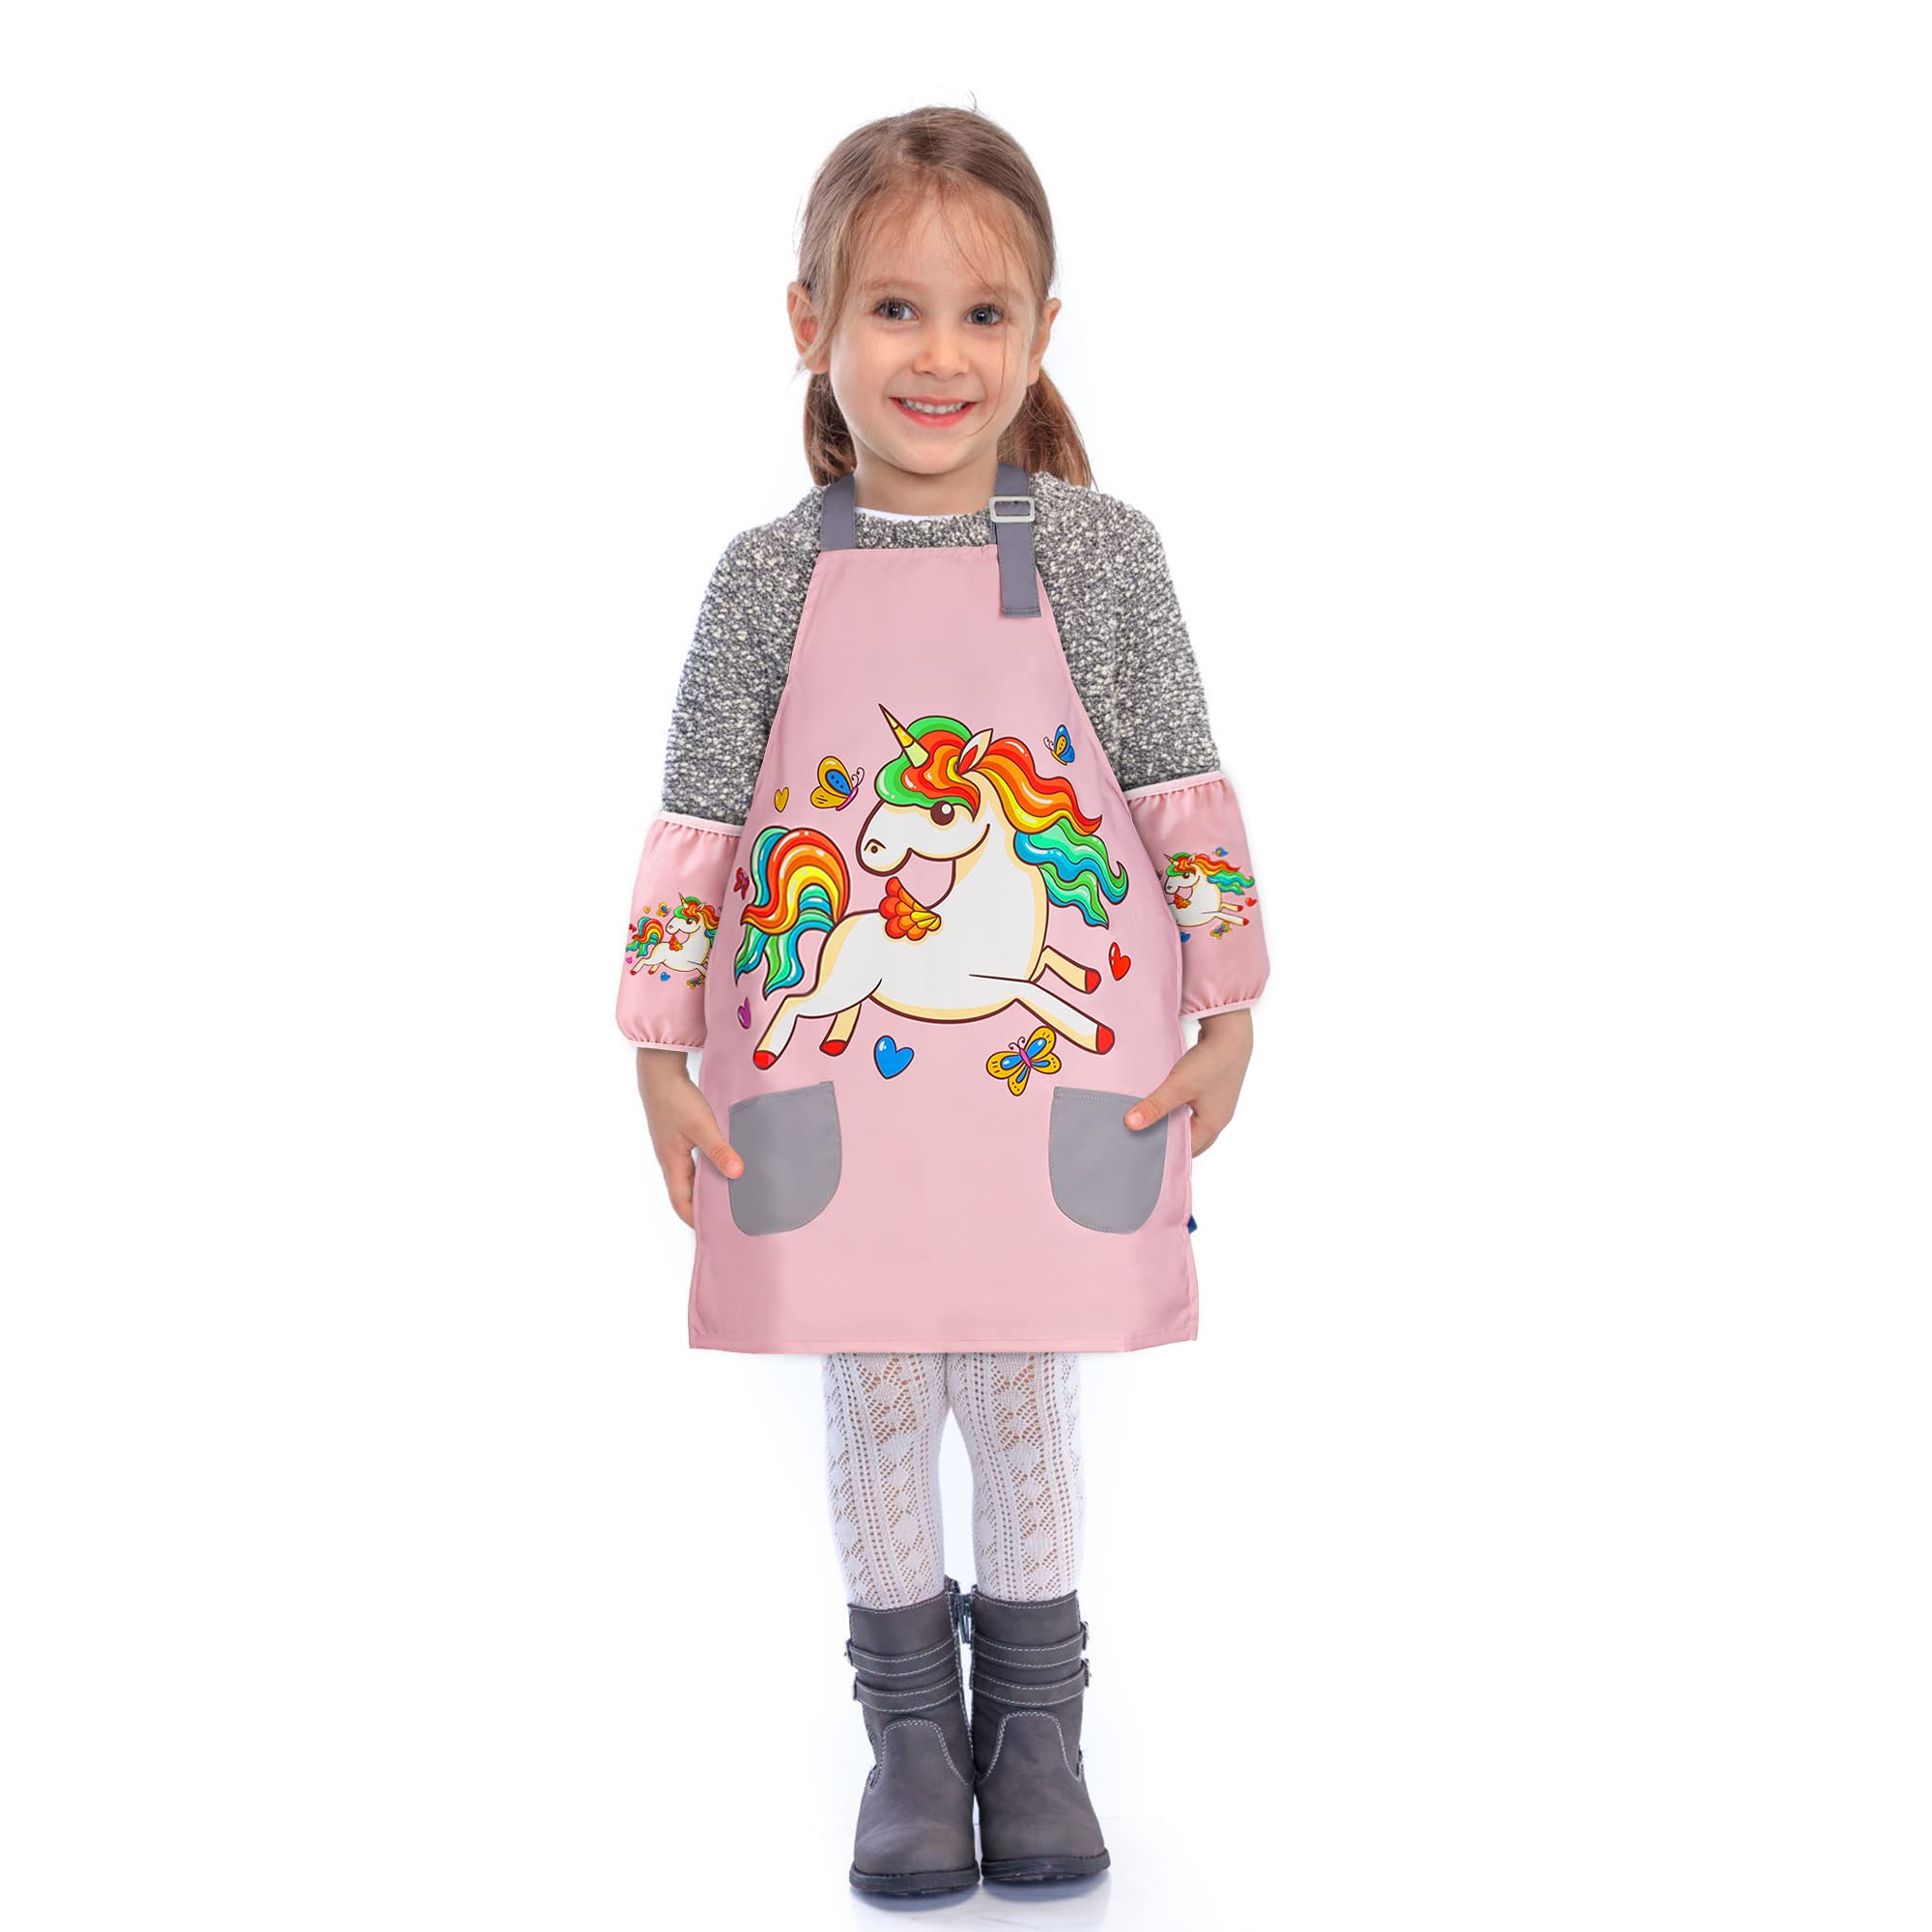 FUSOTO Unicorn Kids Aprons for Girls, Kids Cute Kitchen Cooking Apron for Ages 6-12, Kids Artist Painting Apron with Pockets, Arts and Crafts for Kids, Unicorns Gifts for Girls